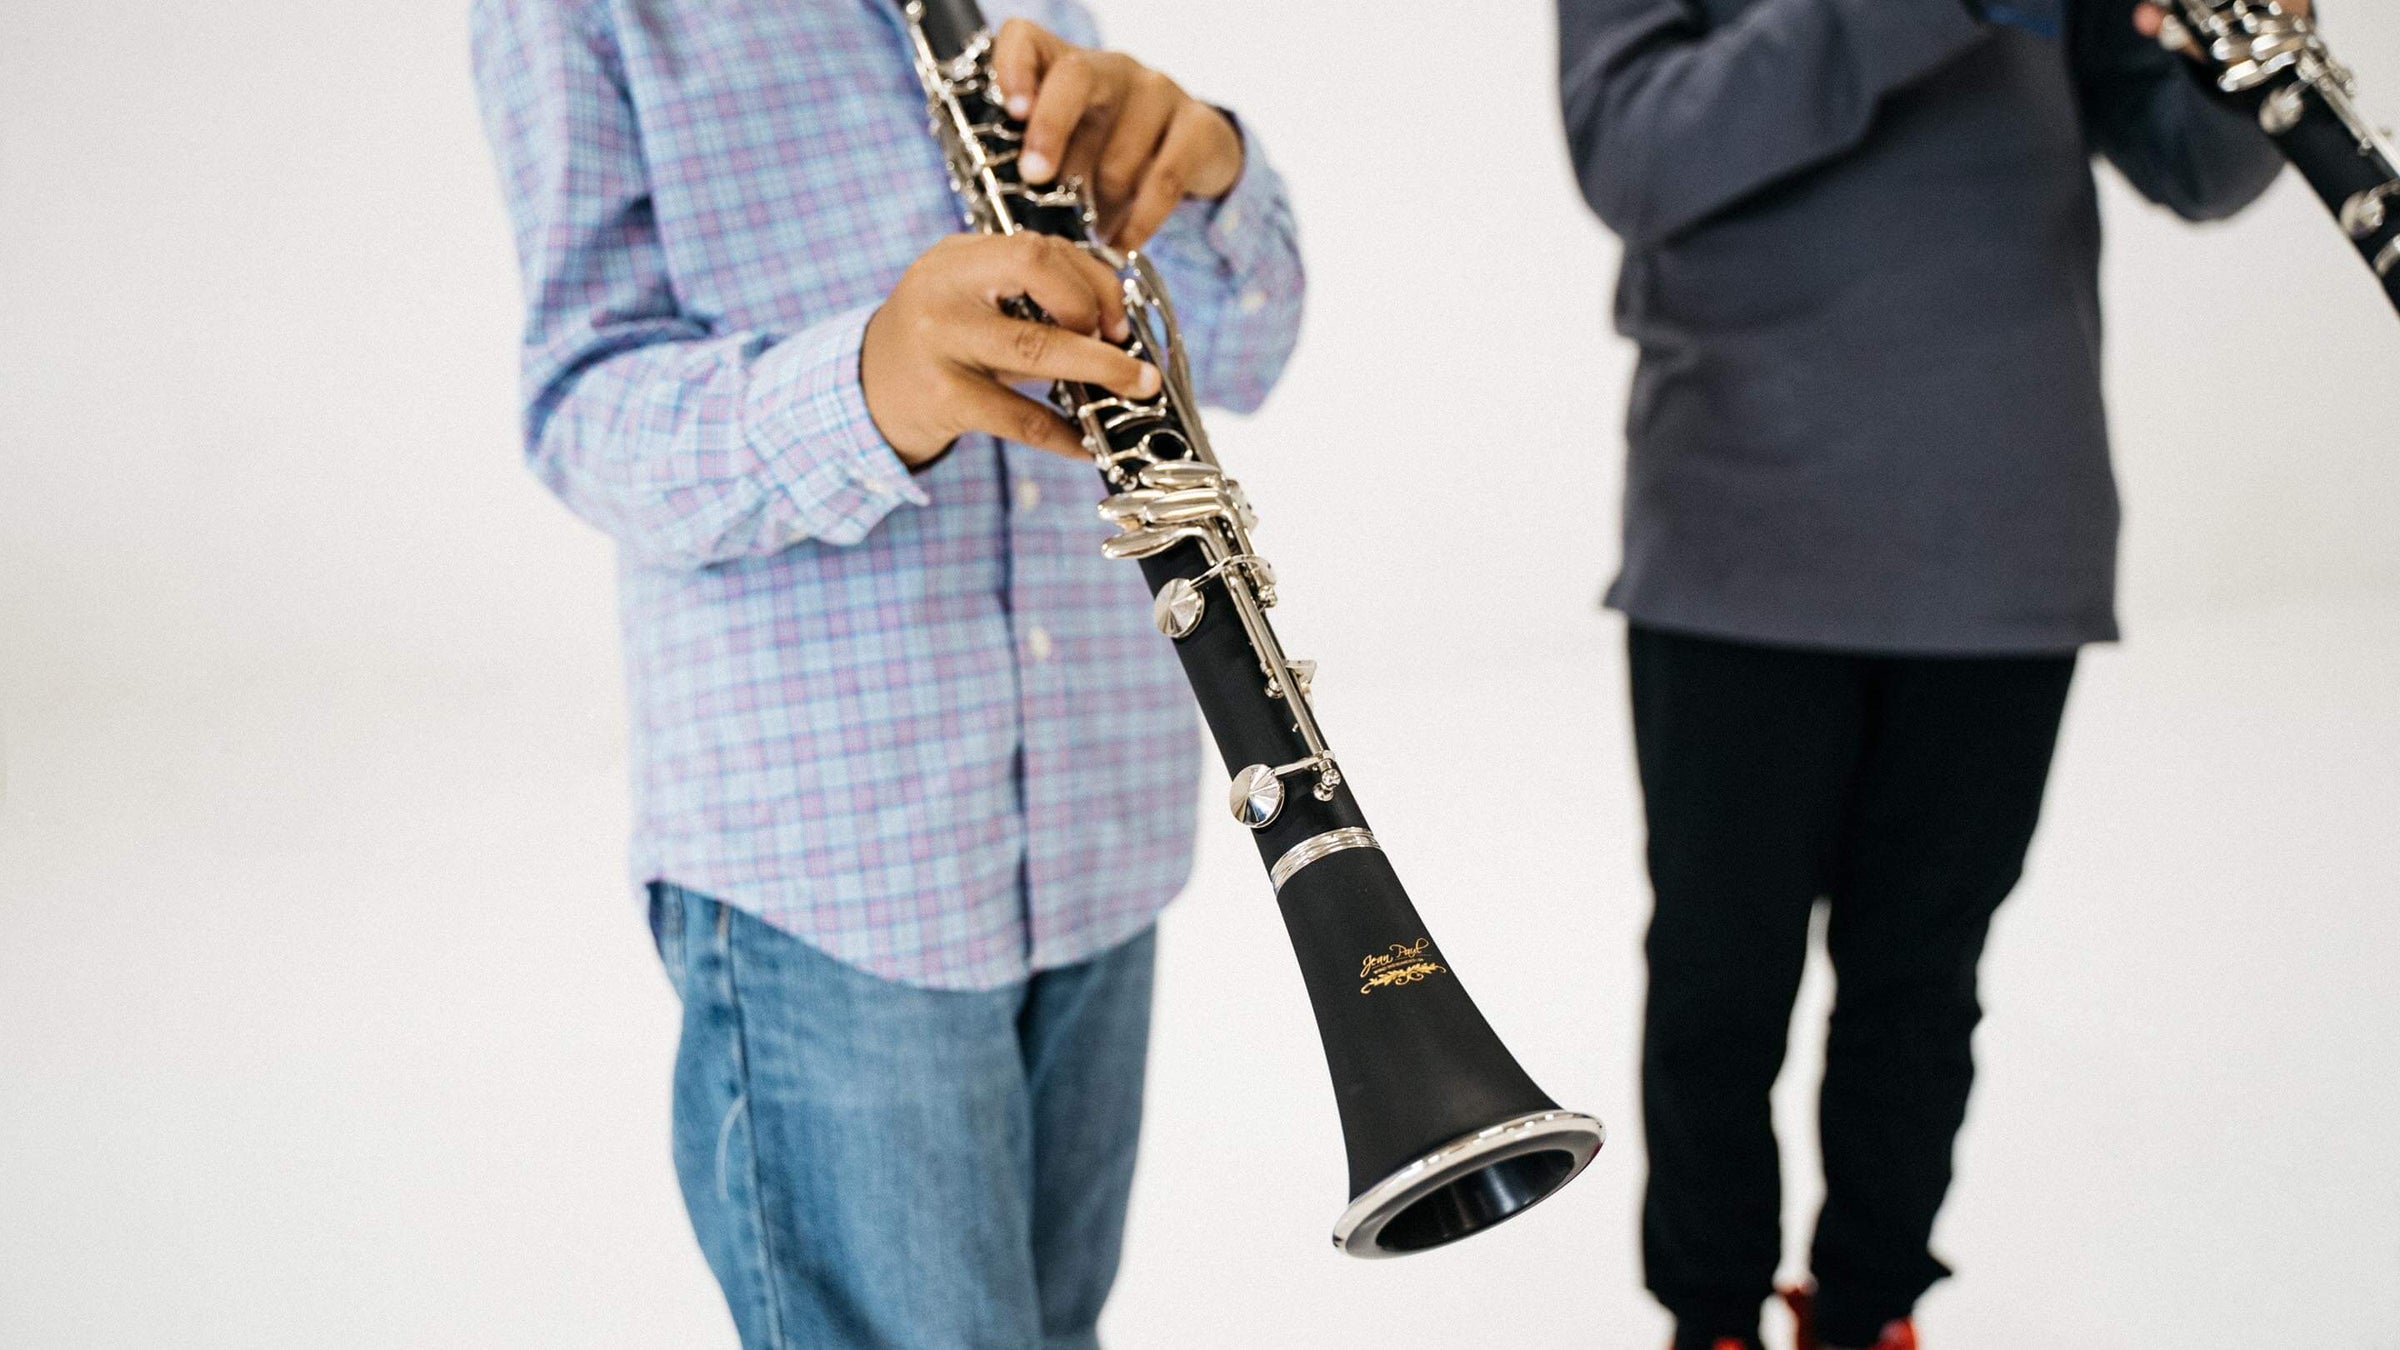 Students playing clarinet.